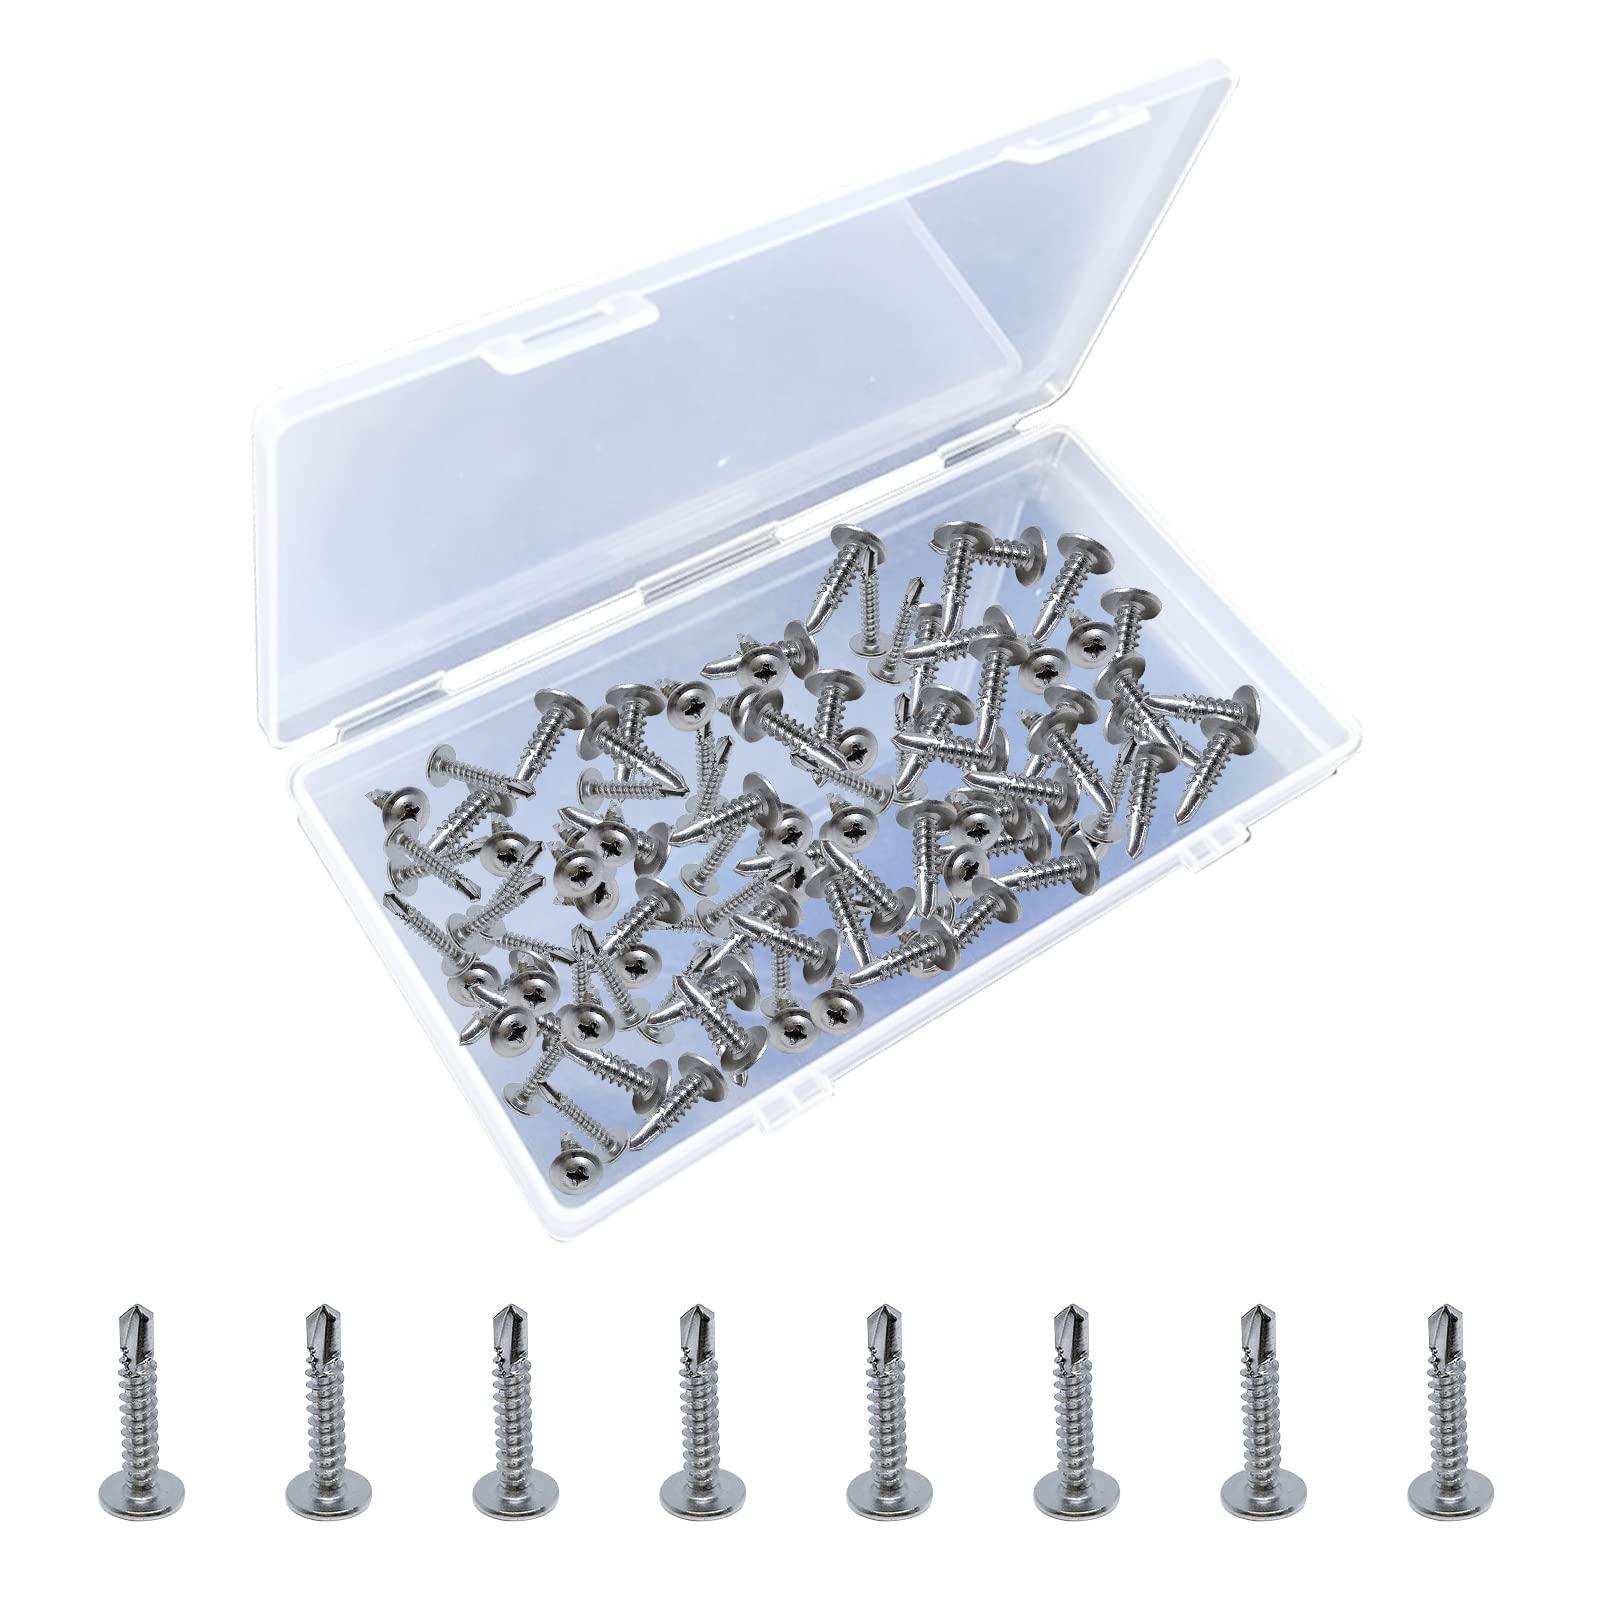 UFURMATE #8 x 3/4" Self Tapping Screws, 150Pcs Stainless Steel Phillips Self Drilling Screws Modified Truss Head Self Tapping Screws Assortment for Building, Car, Boat and Home